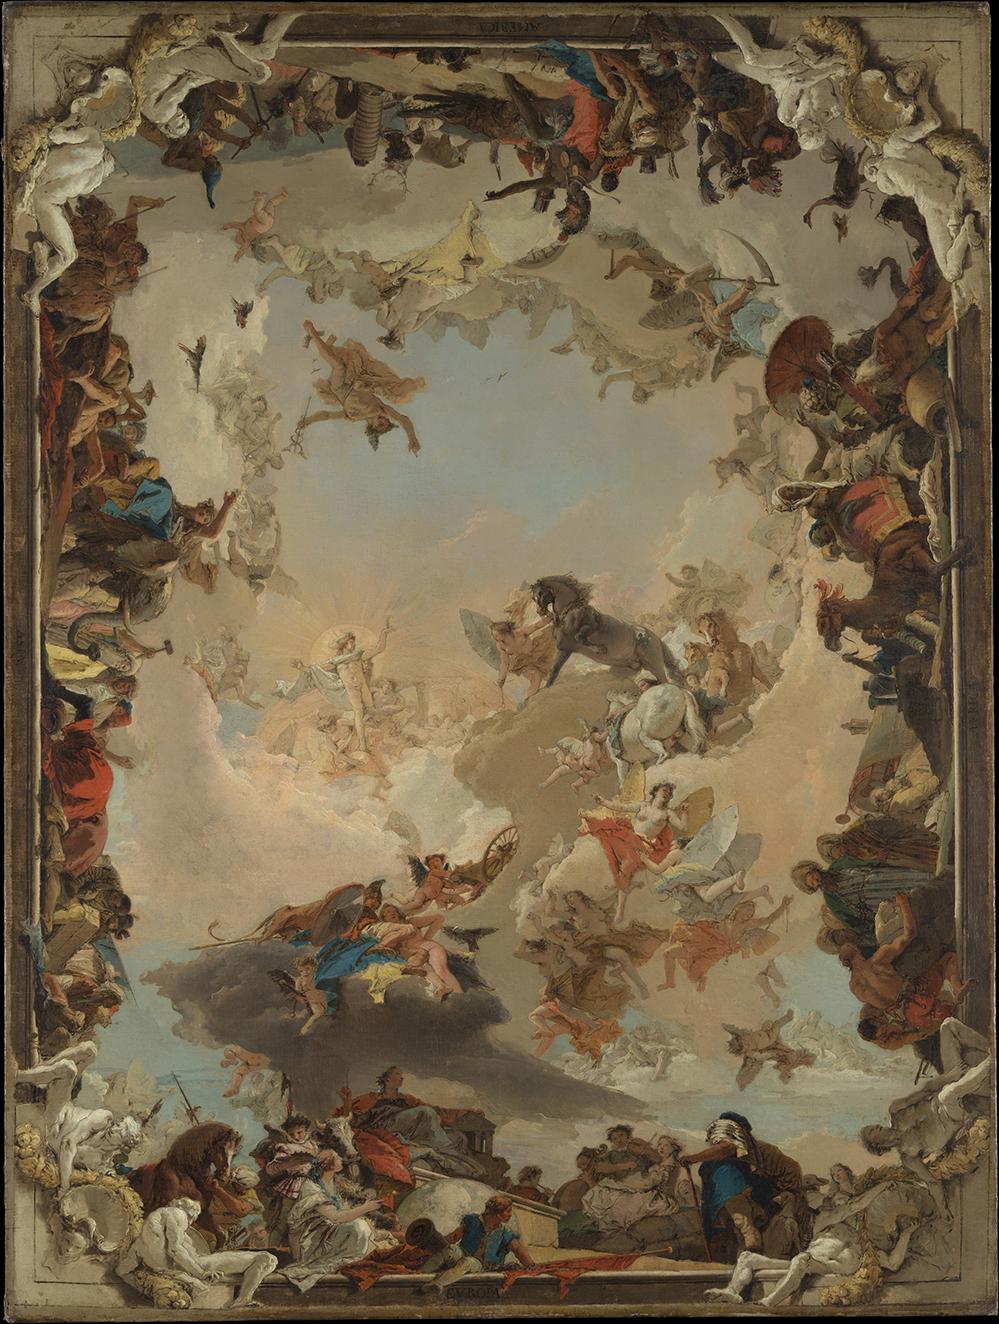 “Allegory of the Planets and Continents,” 1752 by Giovanni Battista Tiepolo. Oil on canvas, 73 x 54 ⅞ inches. Metropolitan Museum of Art, New York. (Public Domain)